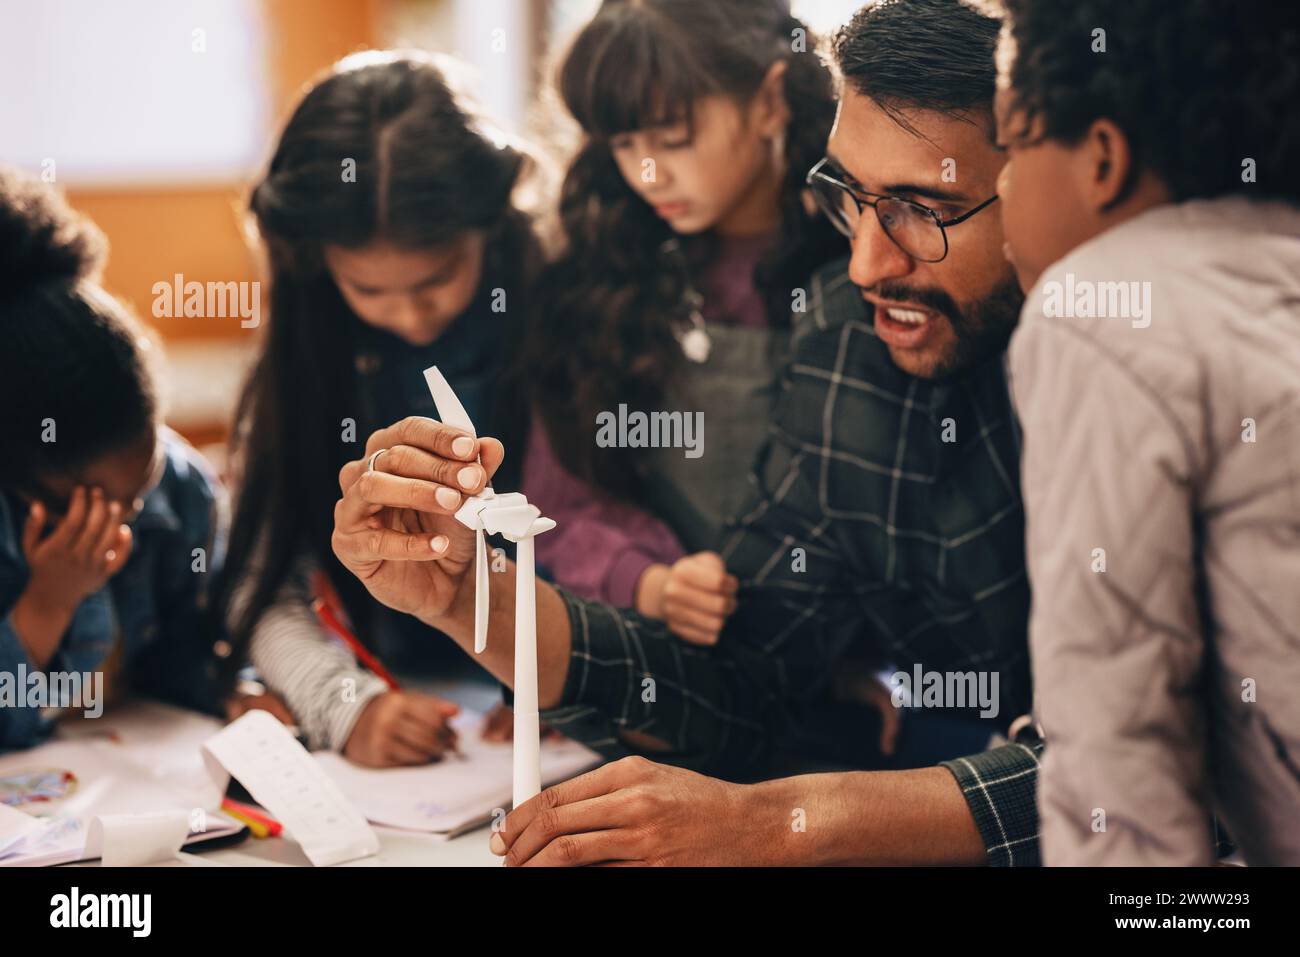 Children learning about renewable energy with a 3D windmill model in science class. Male elementary school teacher giving a practical lesson on wind p Stock Photo